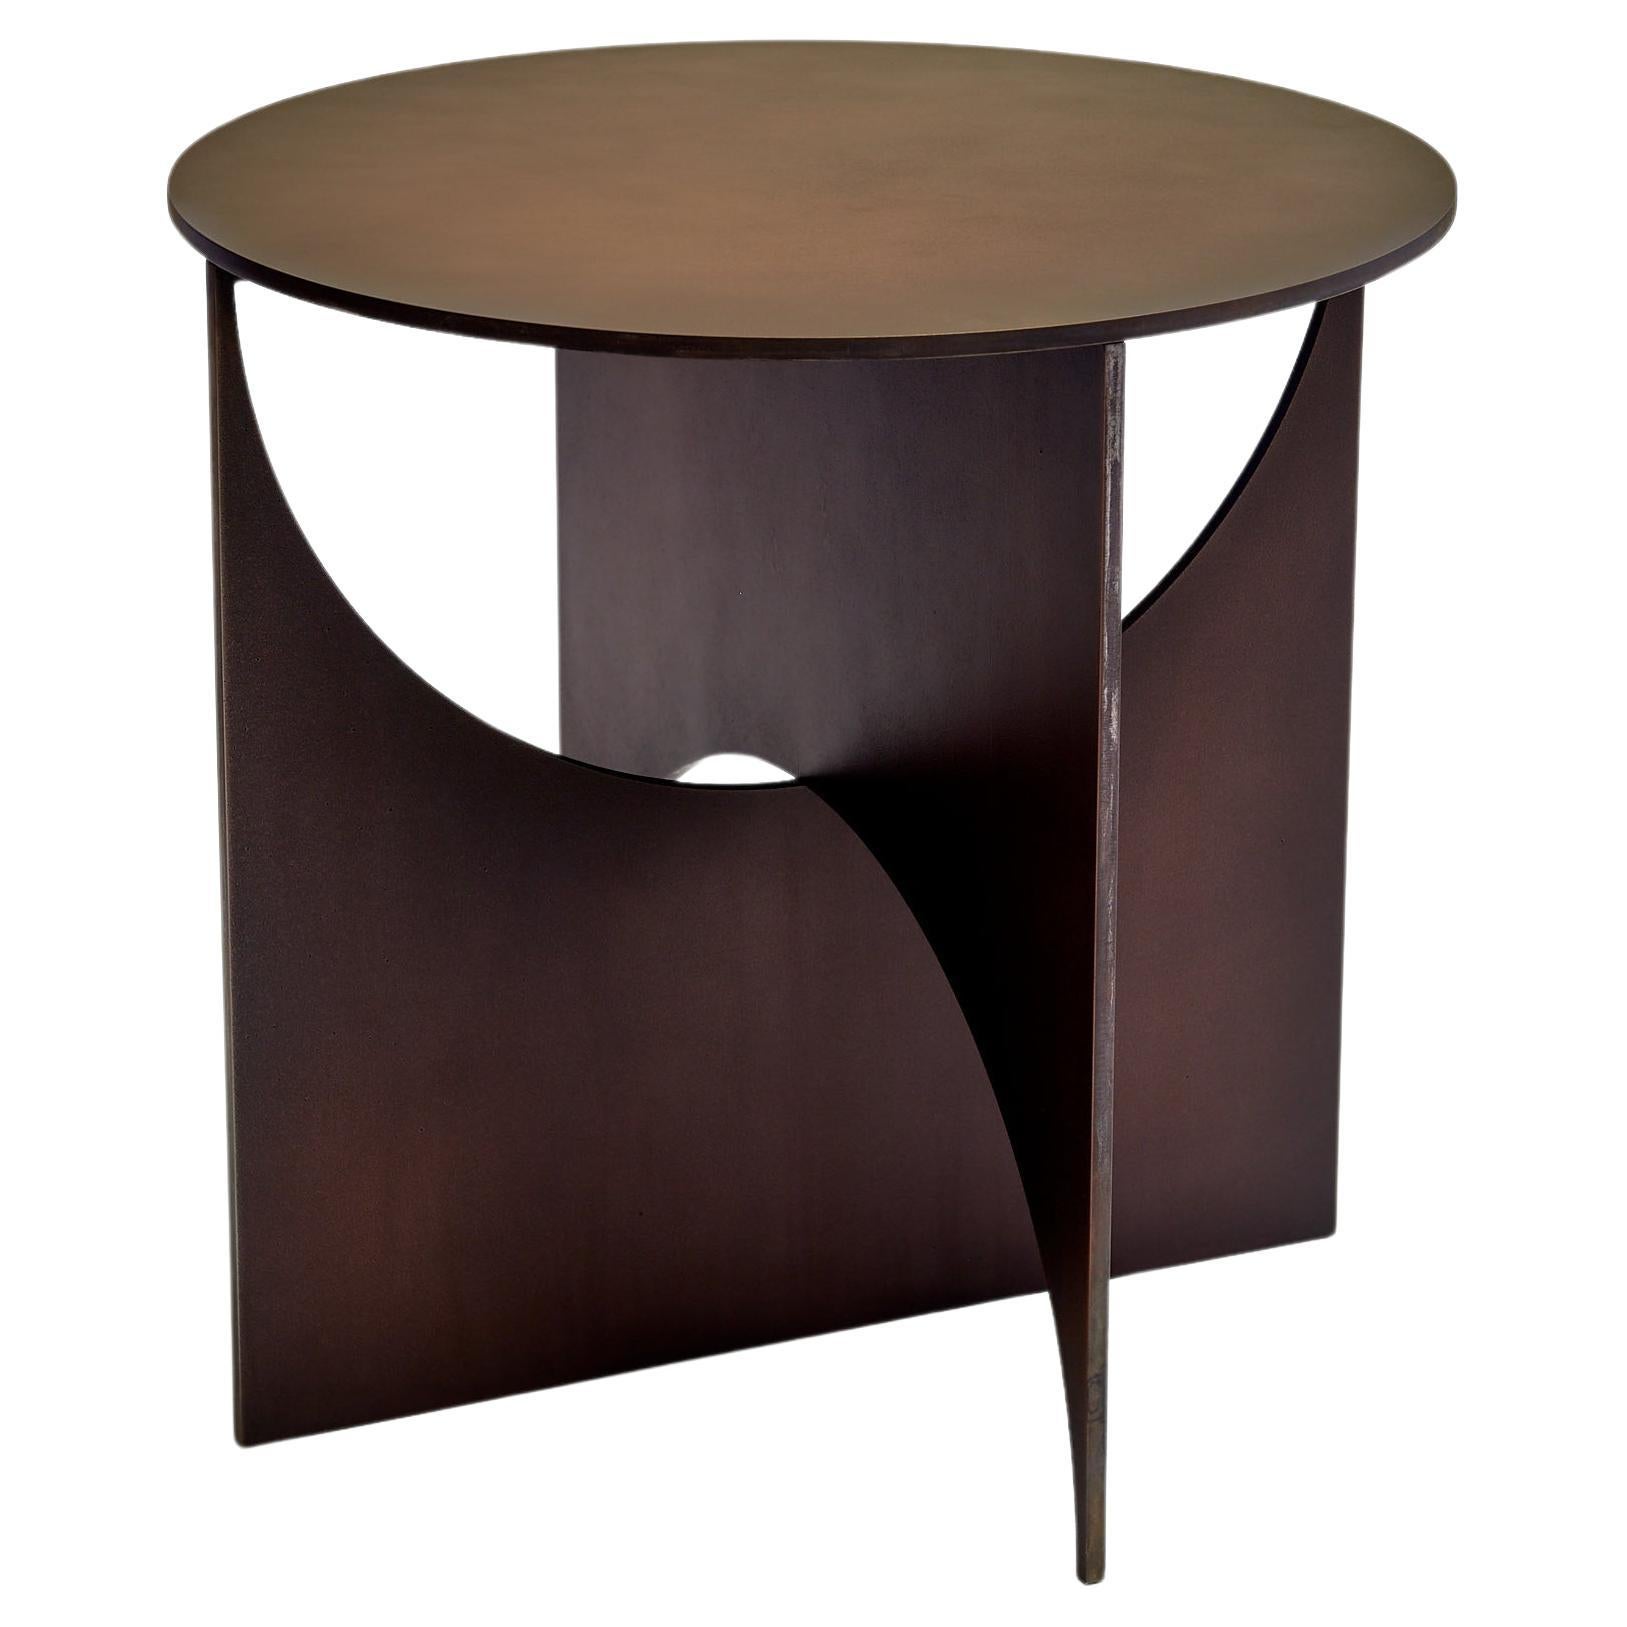 'Iris' Steel Table with Black Copper patina, by Frank Penders For Sale